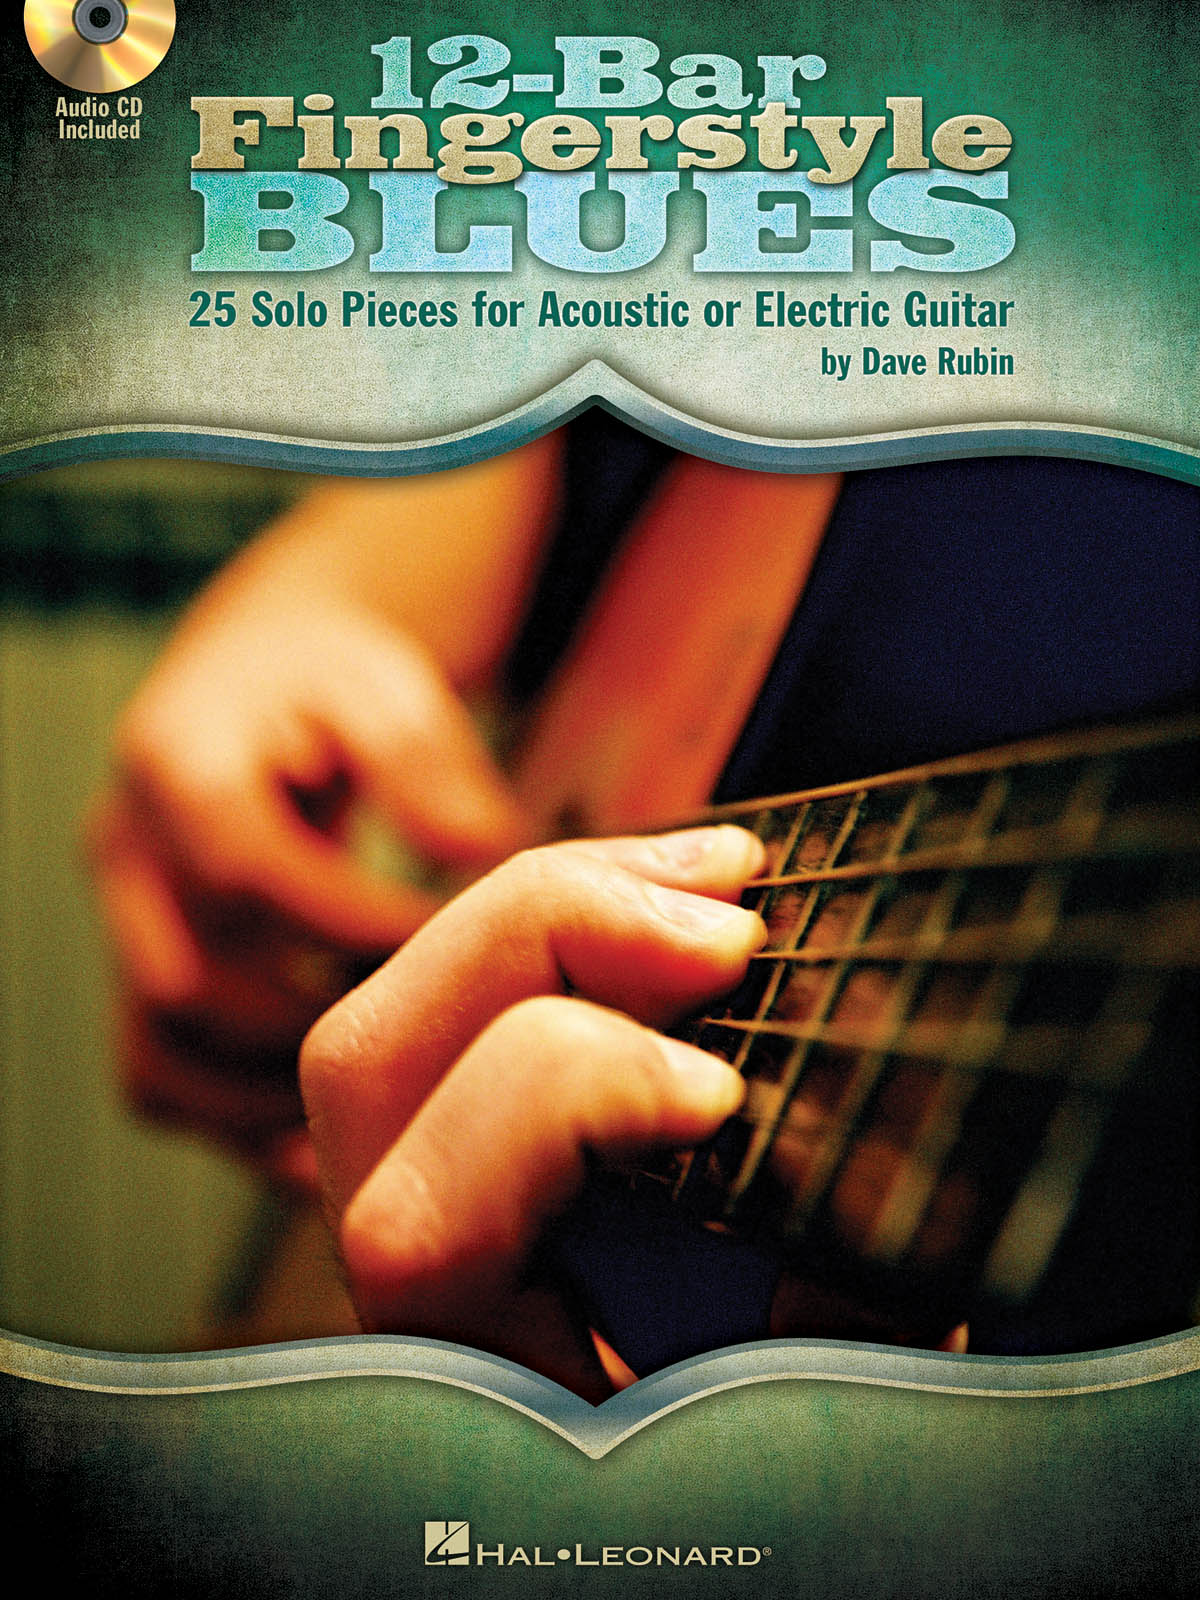 12-Bar Fingerstyle Blues  - 25 Solo Pieces for Acoustic or Electric Guitar